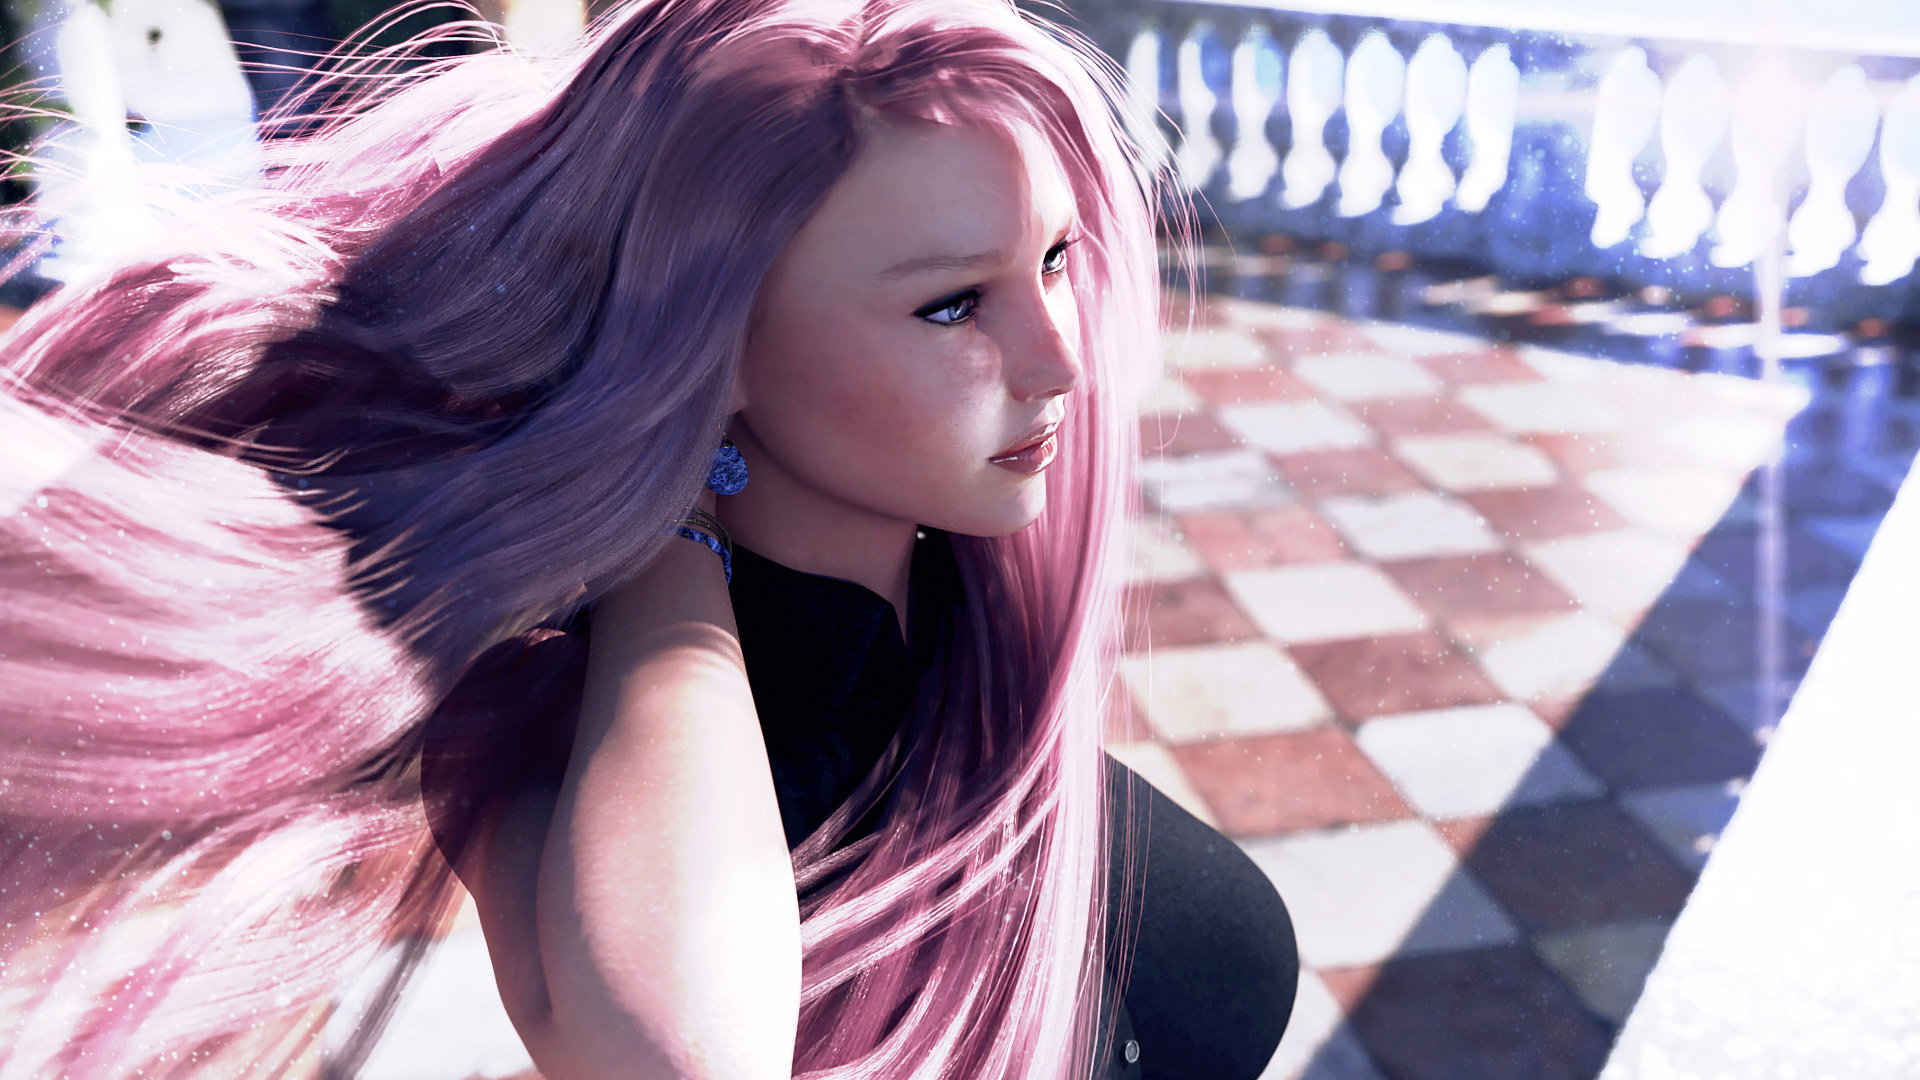 General 1920x1080 The Deluca Family CGI hands above head lips jewelry black clothing digital art adult games pink hair looking away video game characters tiles balustrade sunlight backlighting long hair hands in hair bracelets video game art lipstick closed mouth